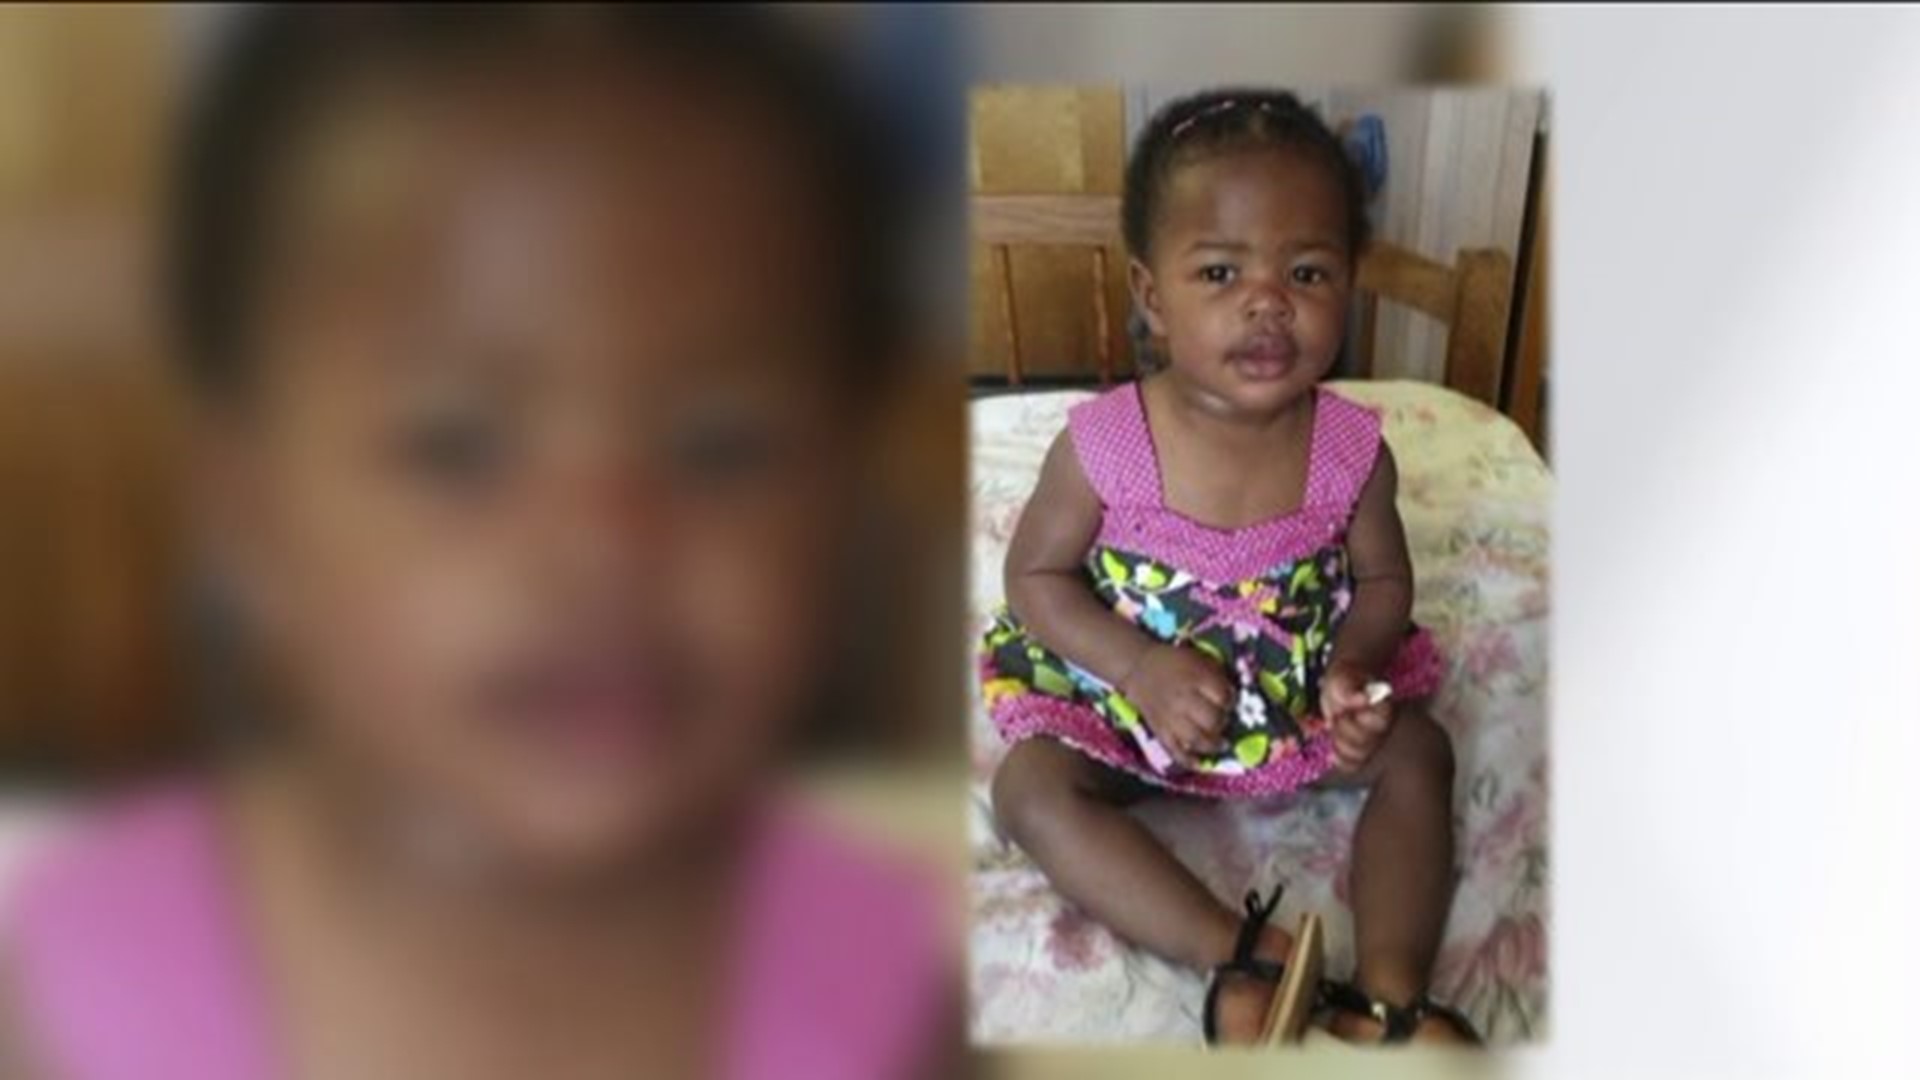 Man sentenced to 42 years for killing toddler